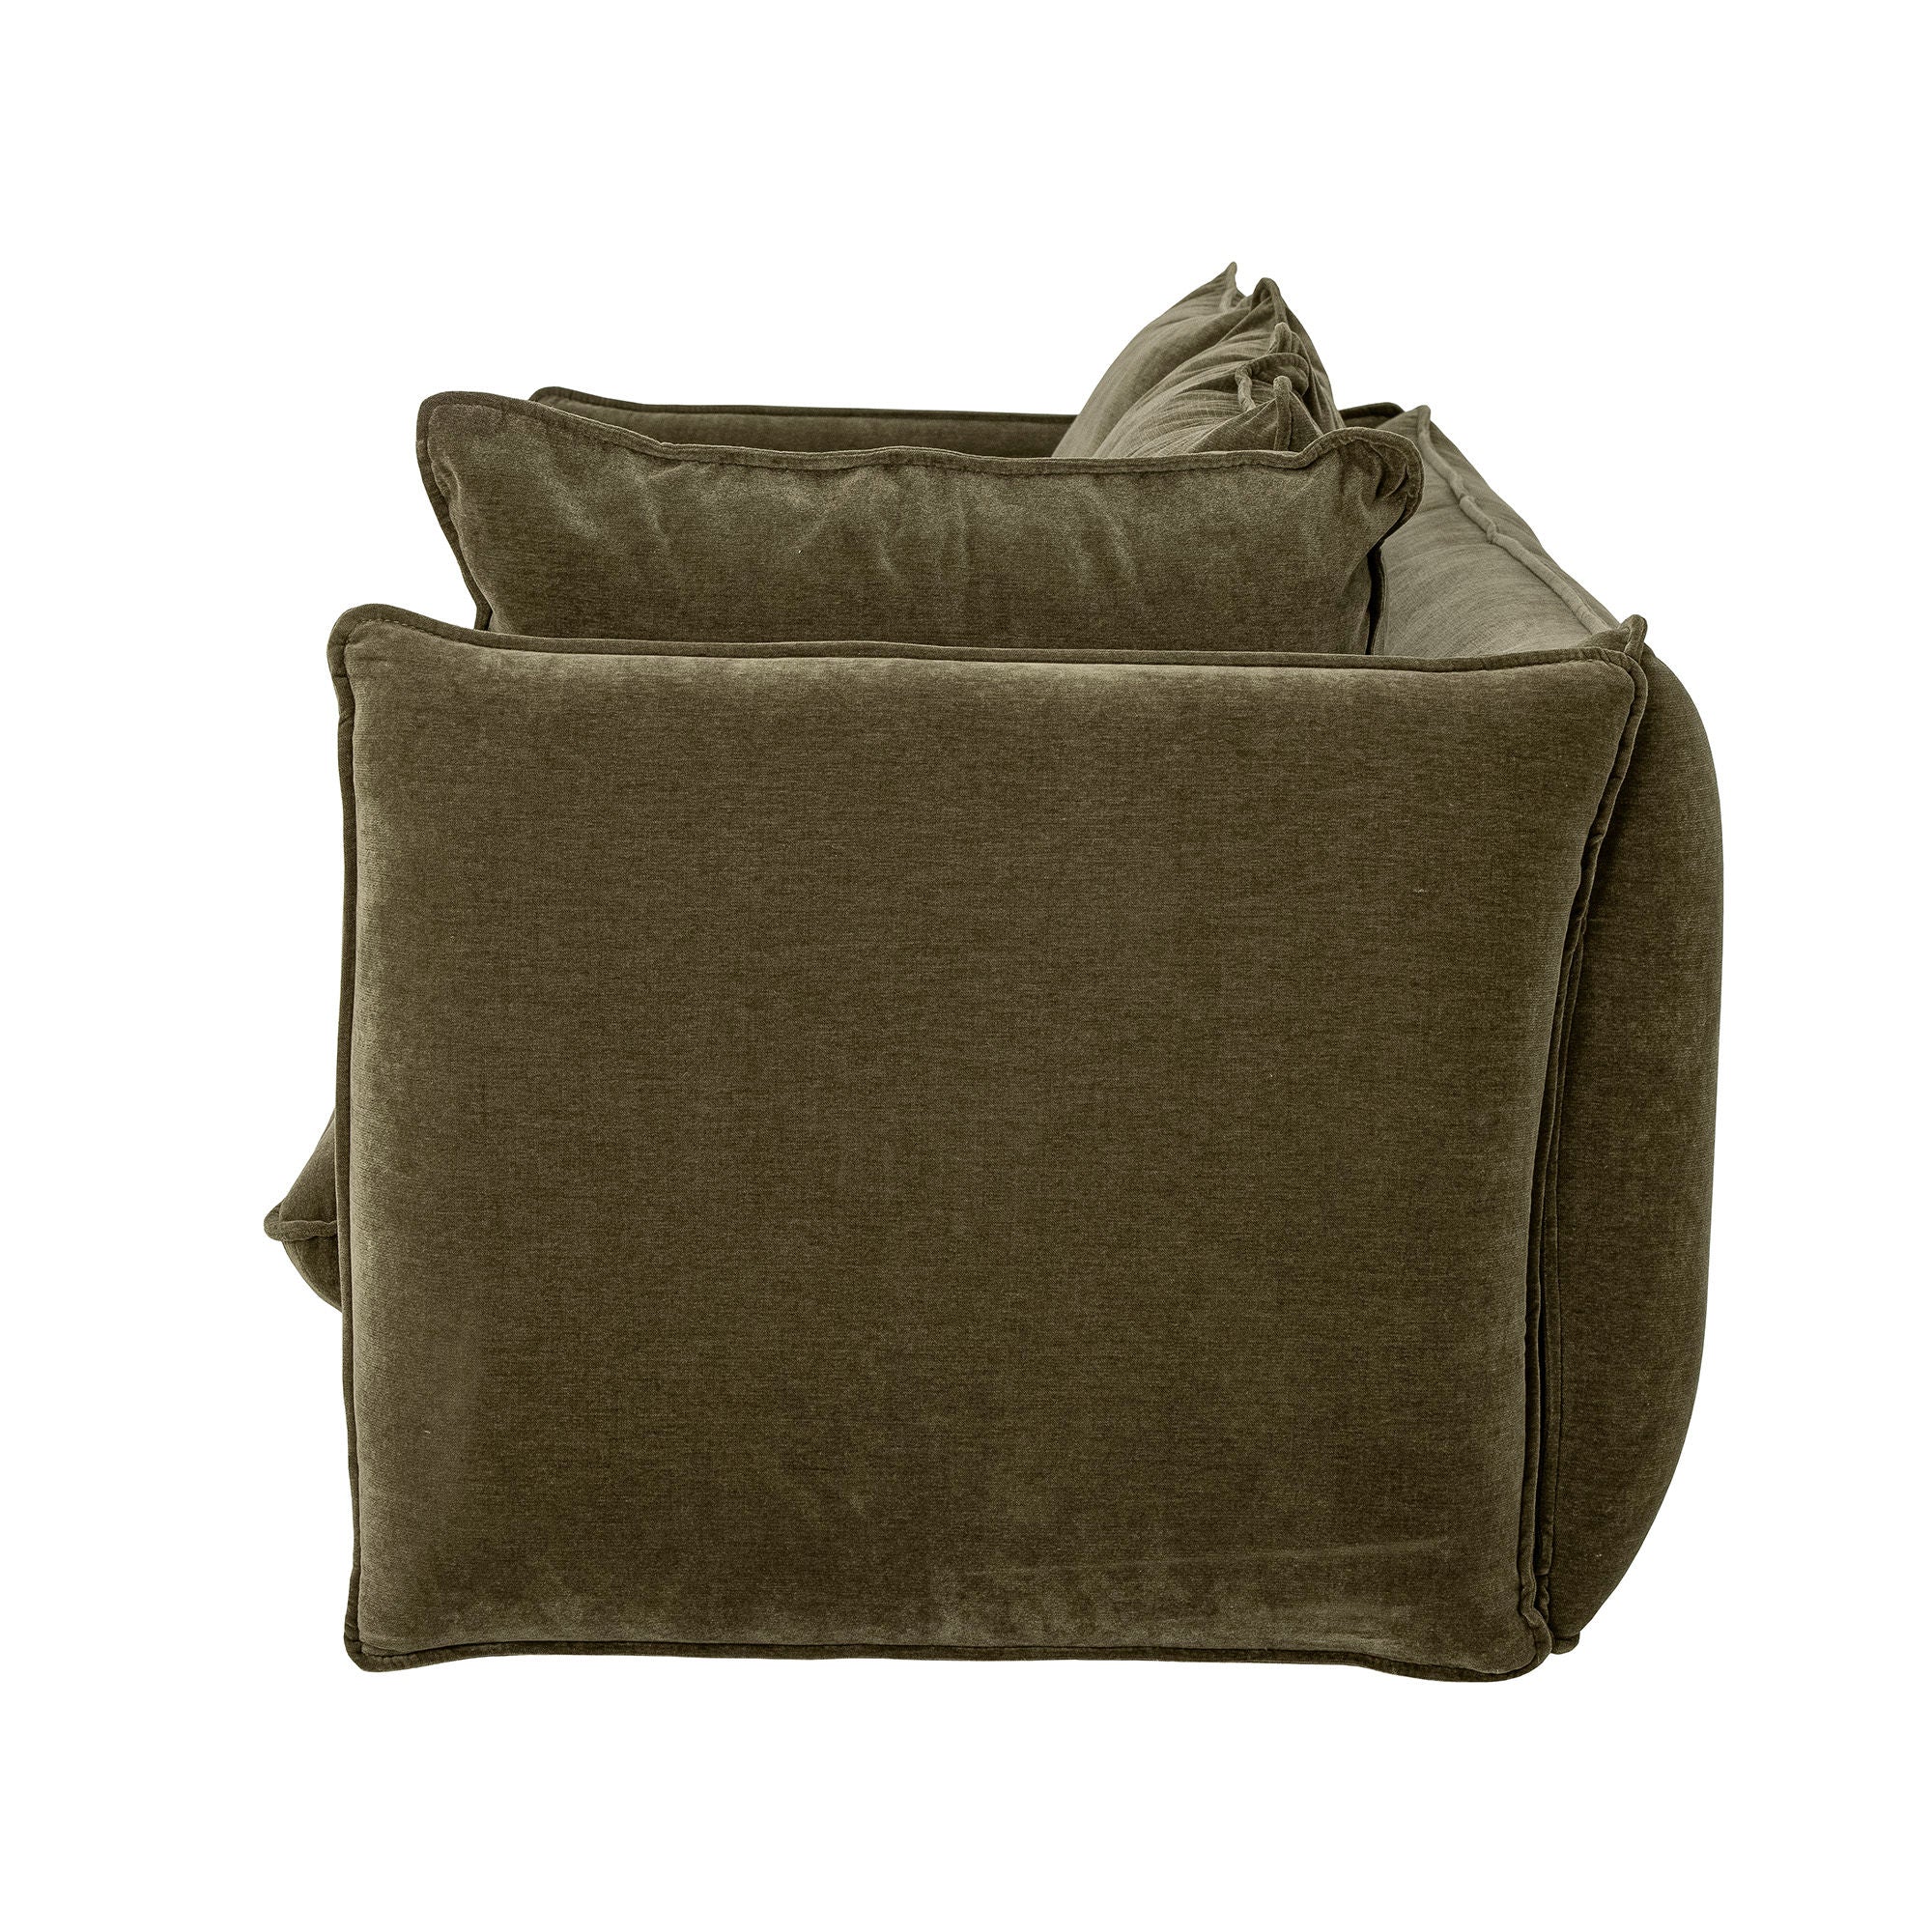 Bloomingville Austin Sofa, Green, Recycled Polyester